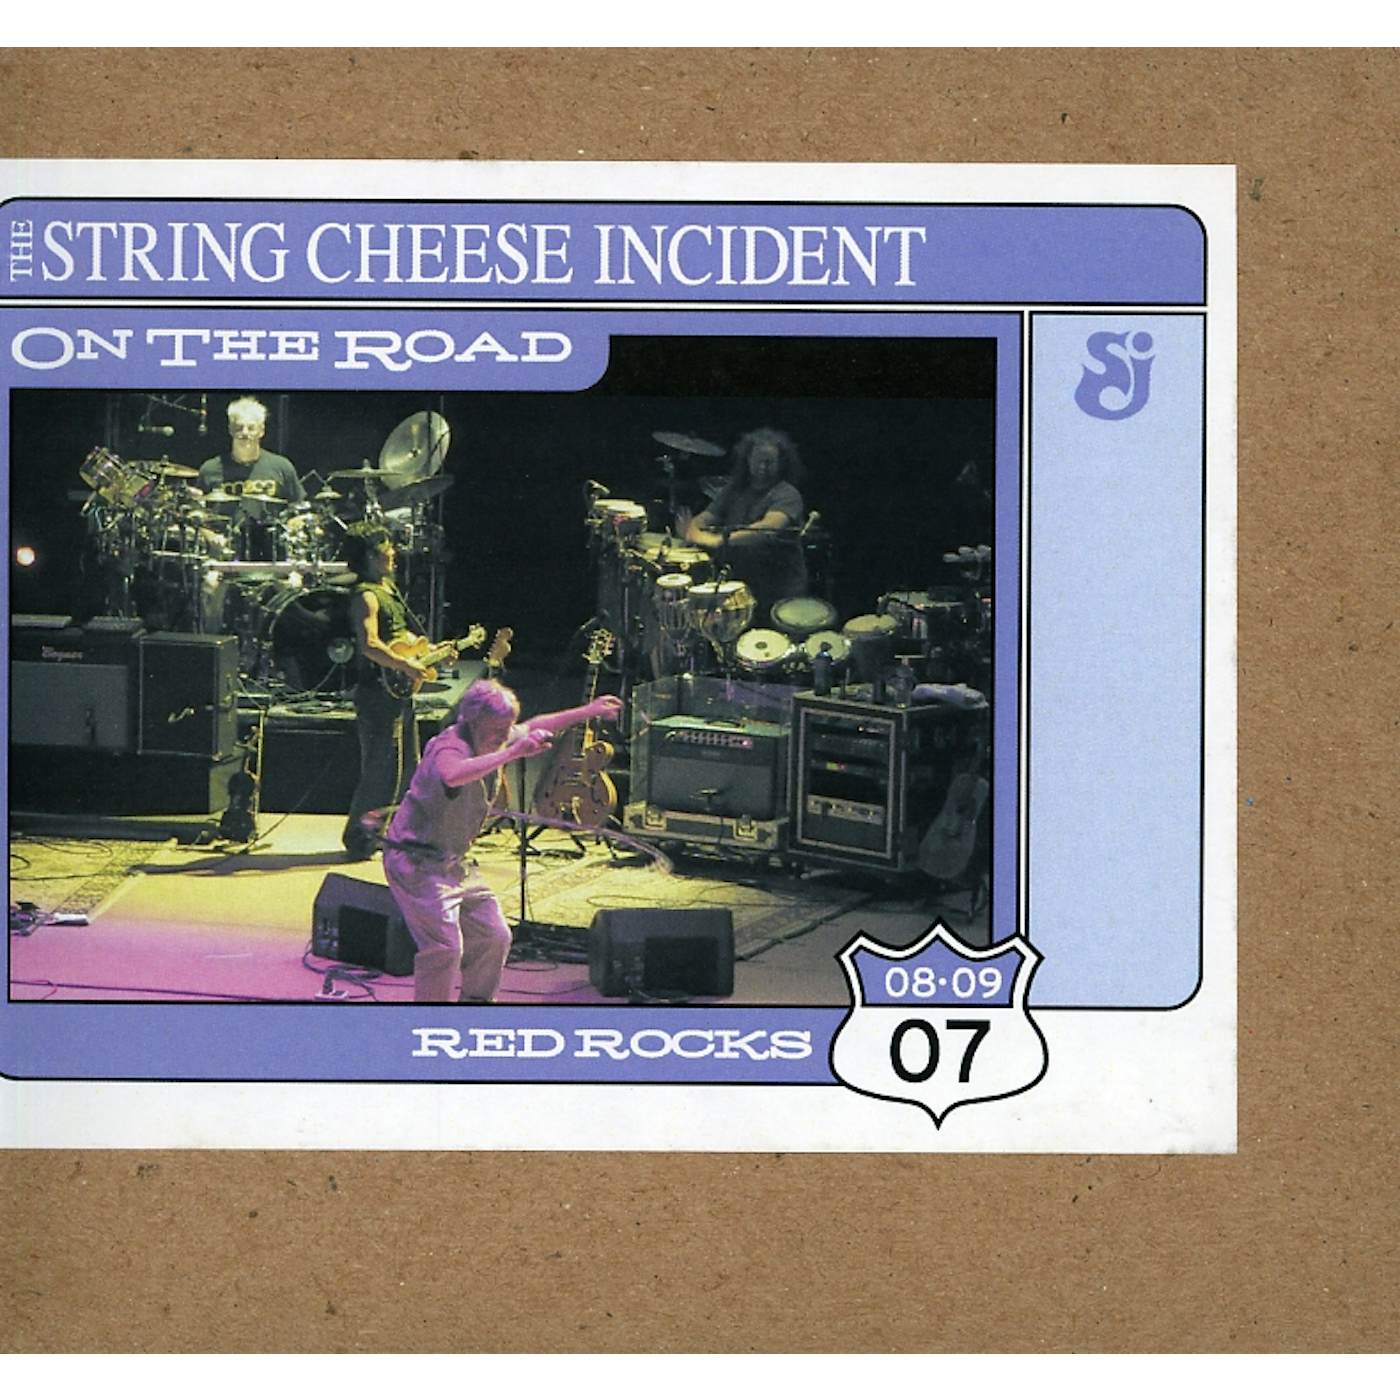 The String Cheese Incident OTR: MORRISON CO 8-9-07 CD